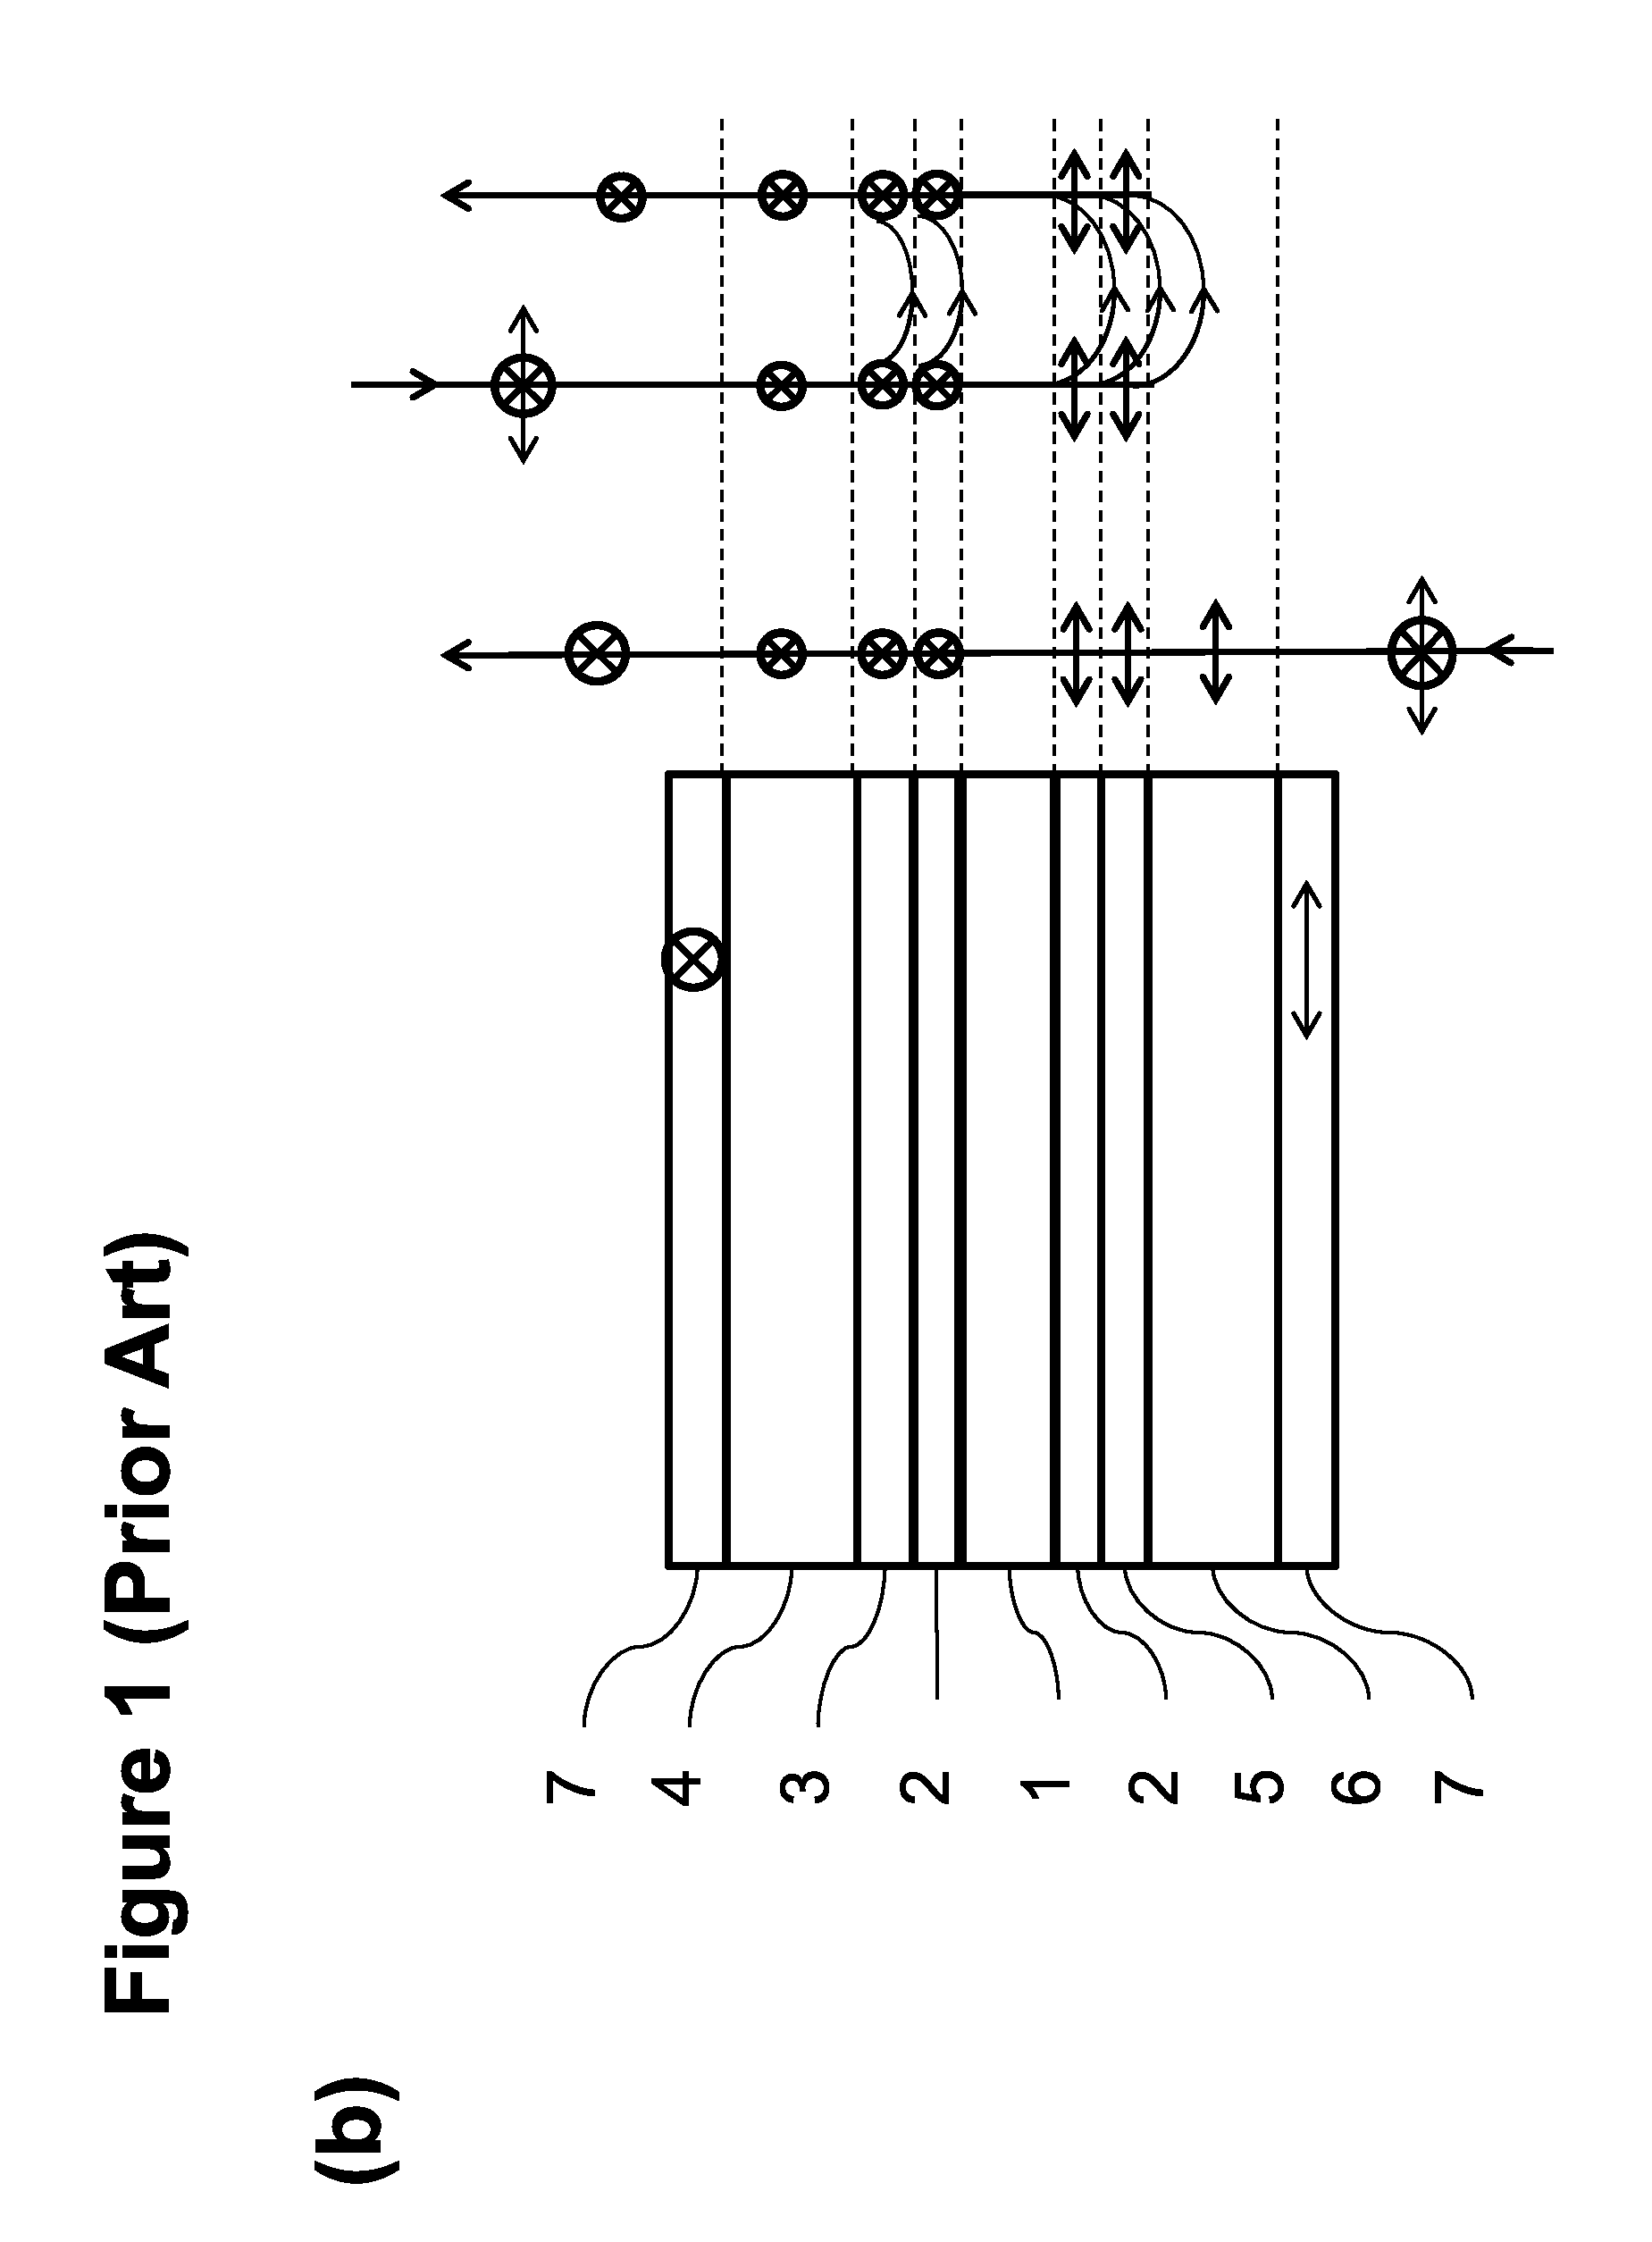 Sunlight readable LCD with uniform in-cell retarder